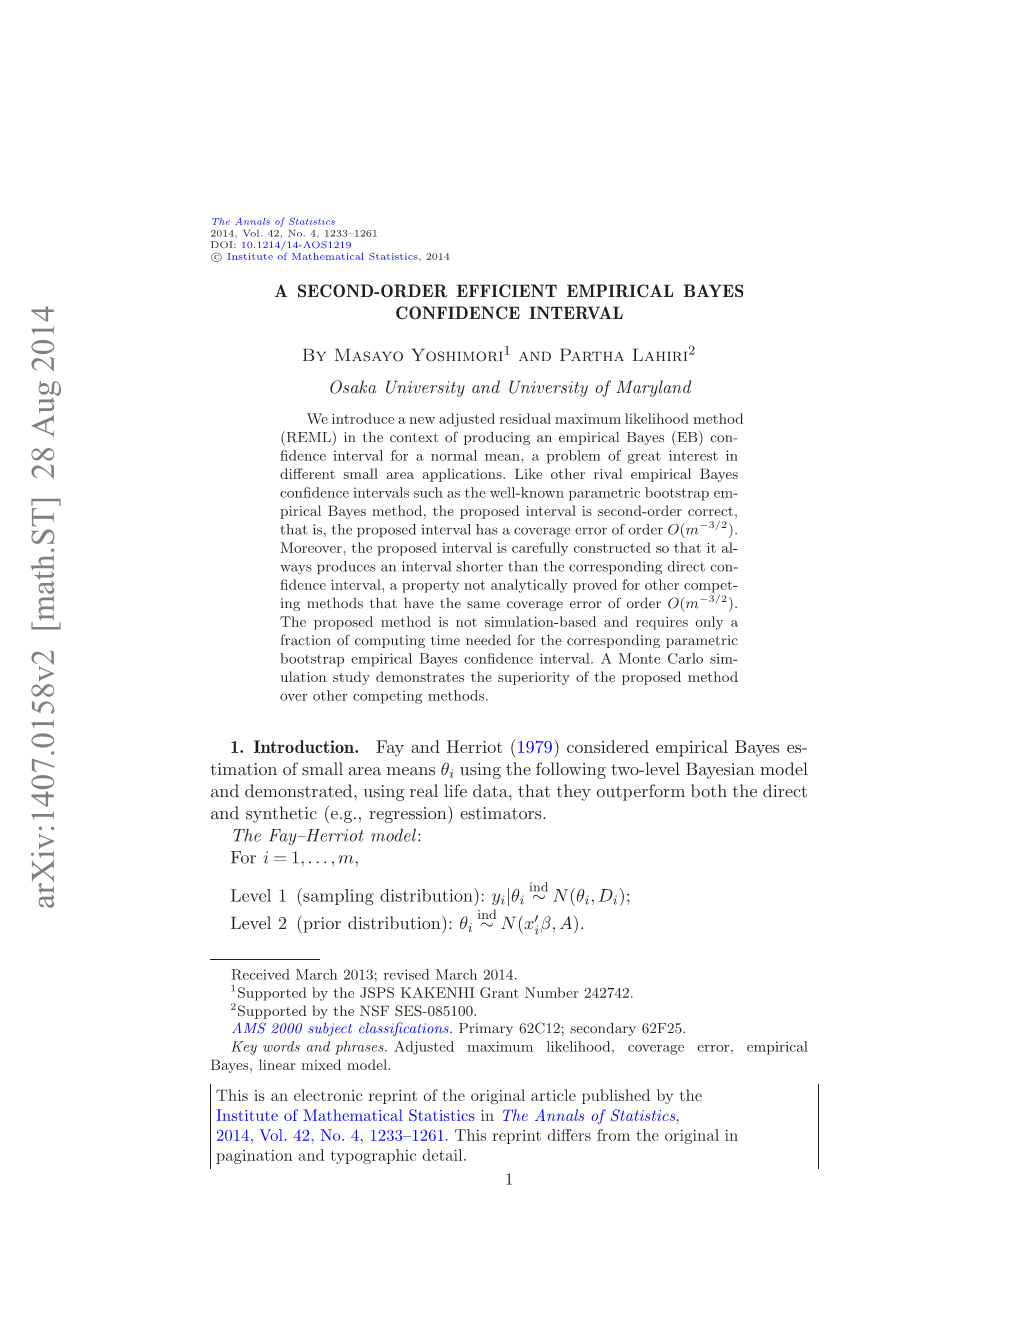 A Second-Order Efficient Empirical Bayes Confidence Interval